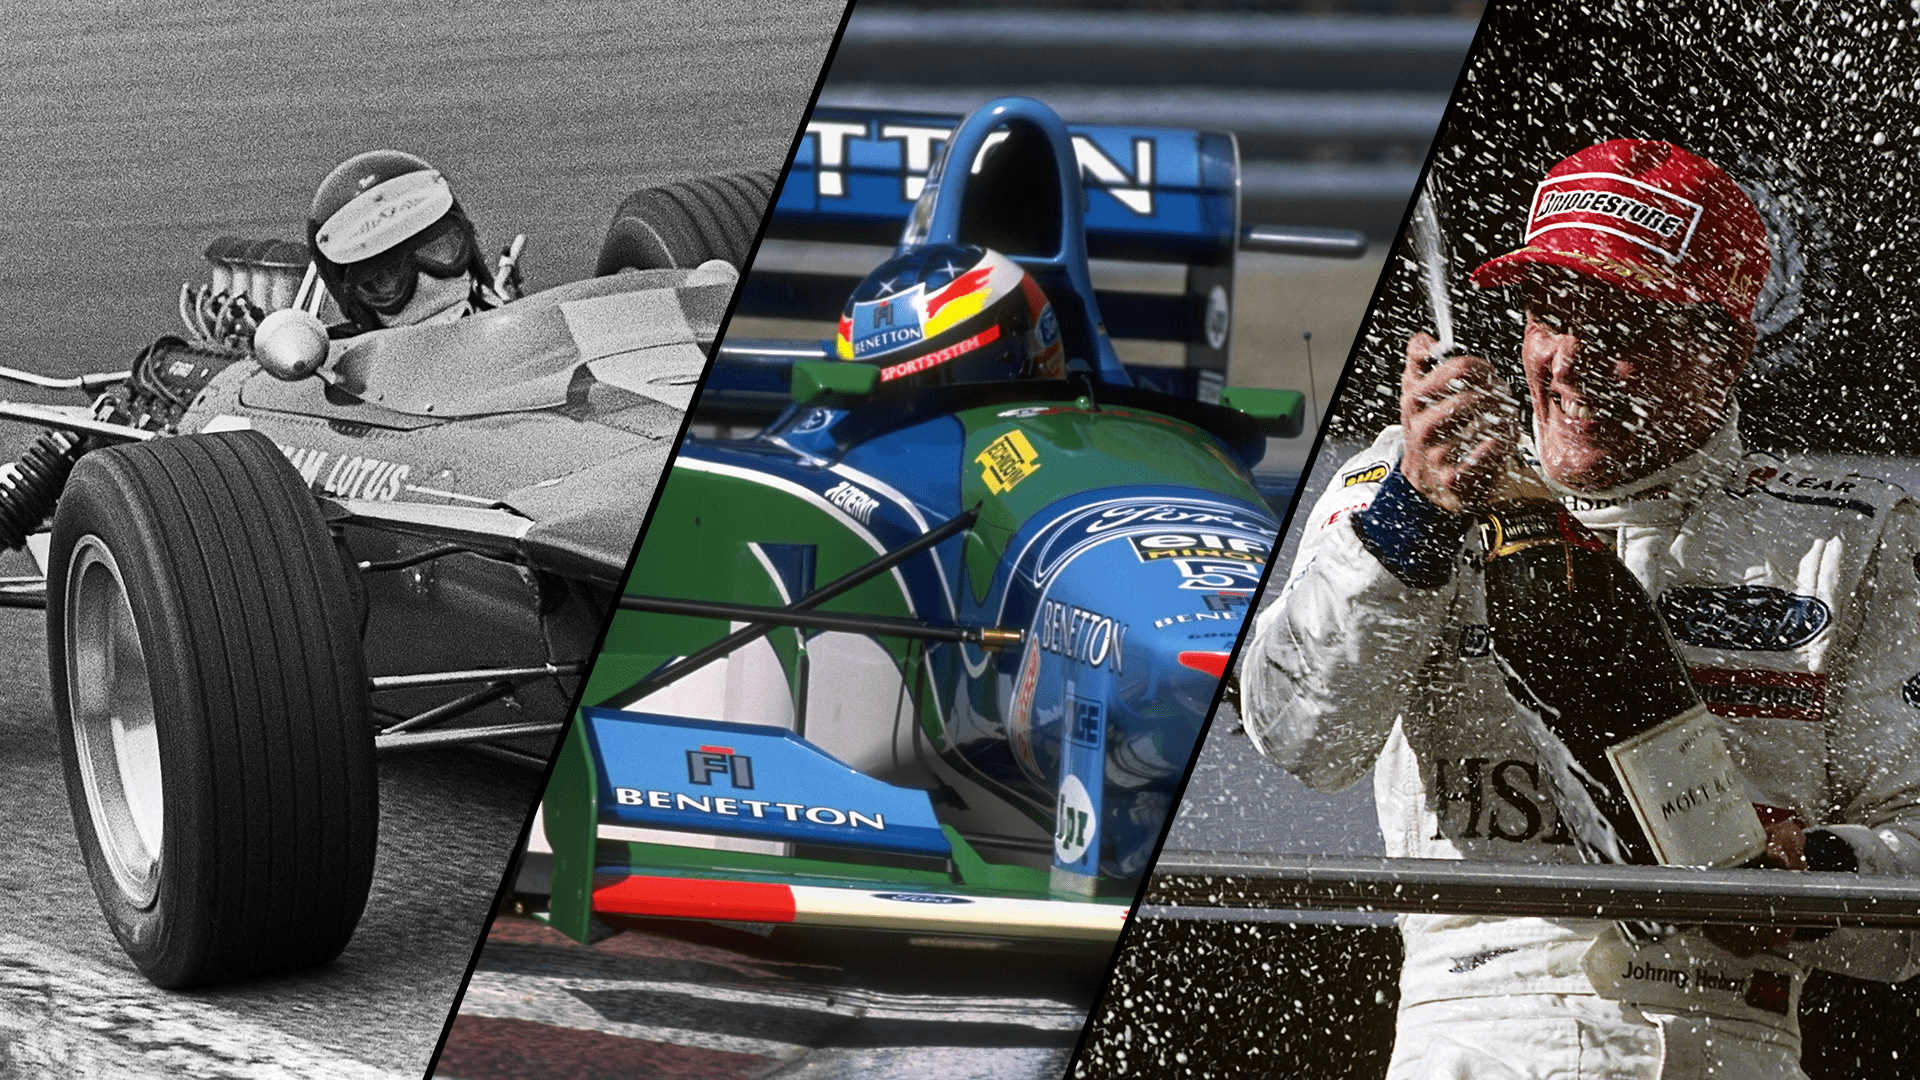 GREATEST HITS: Ford's best moments in F1 as they get set for a